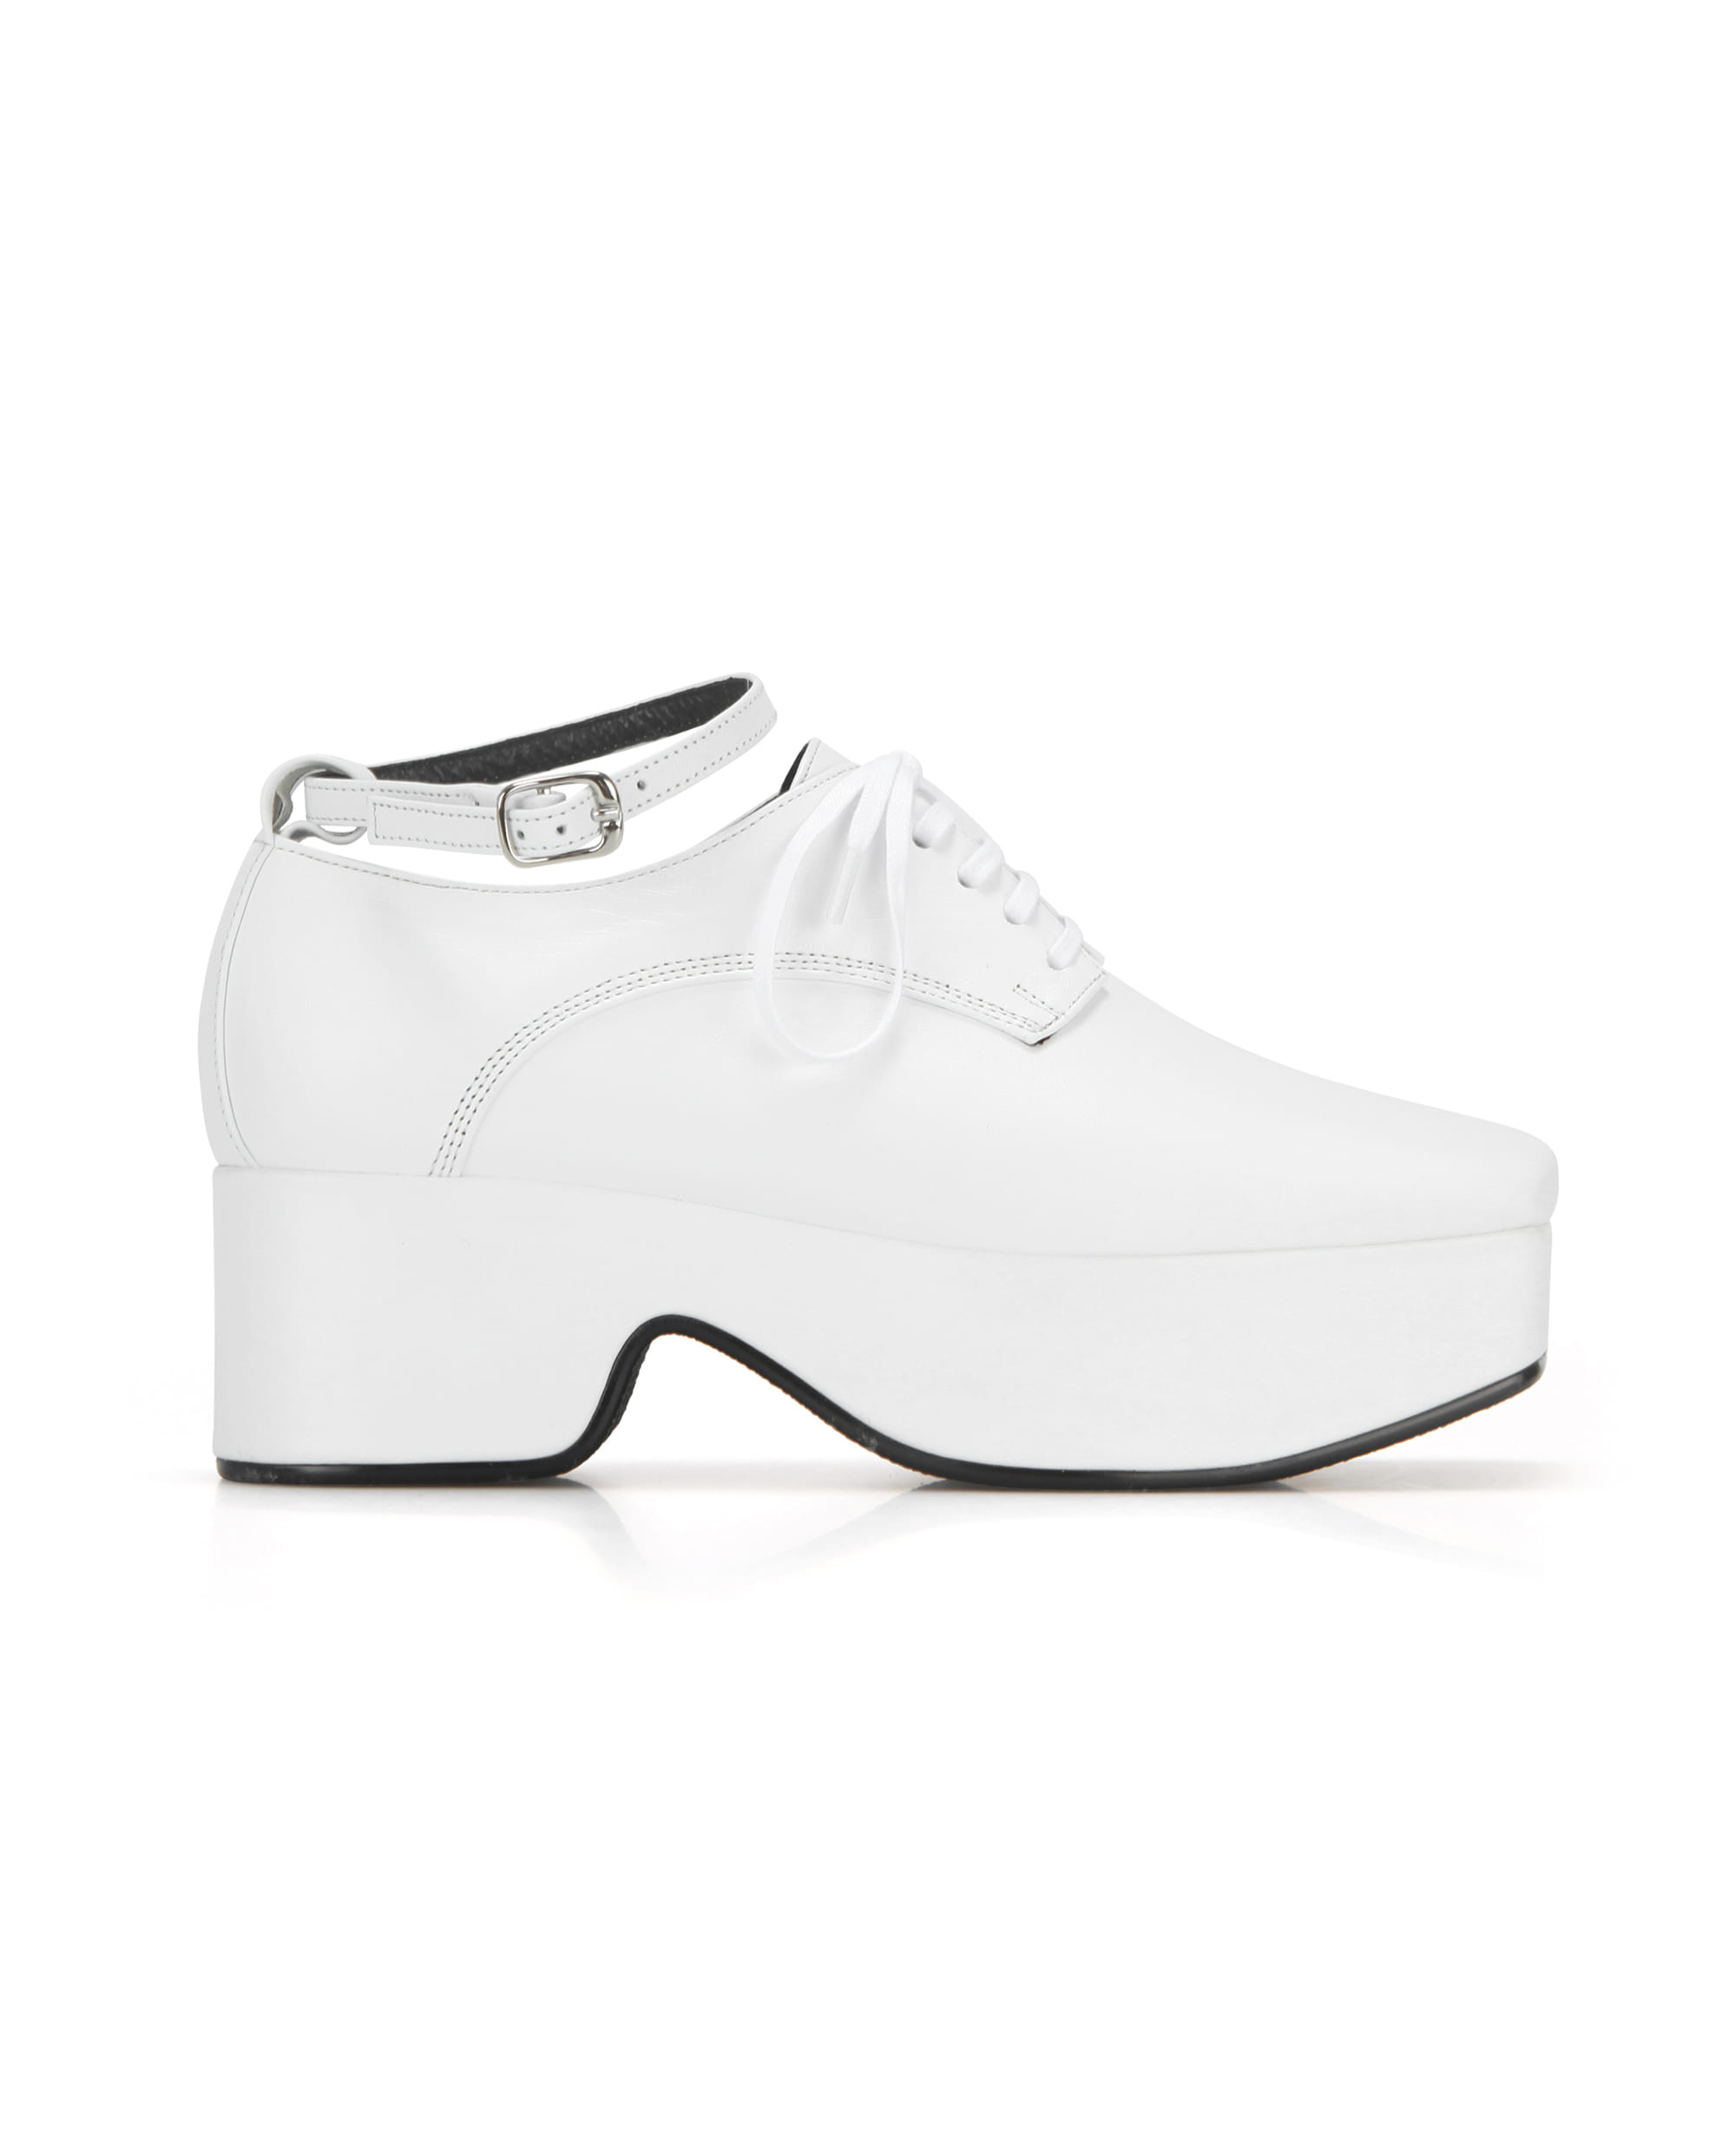 Squared toe derby platforms (+ball chain) | white